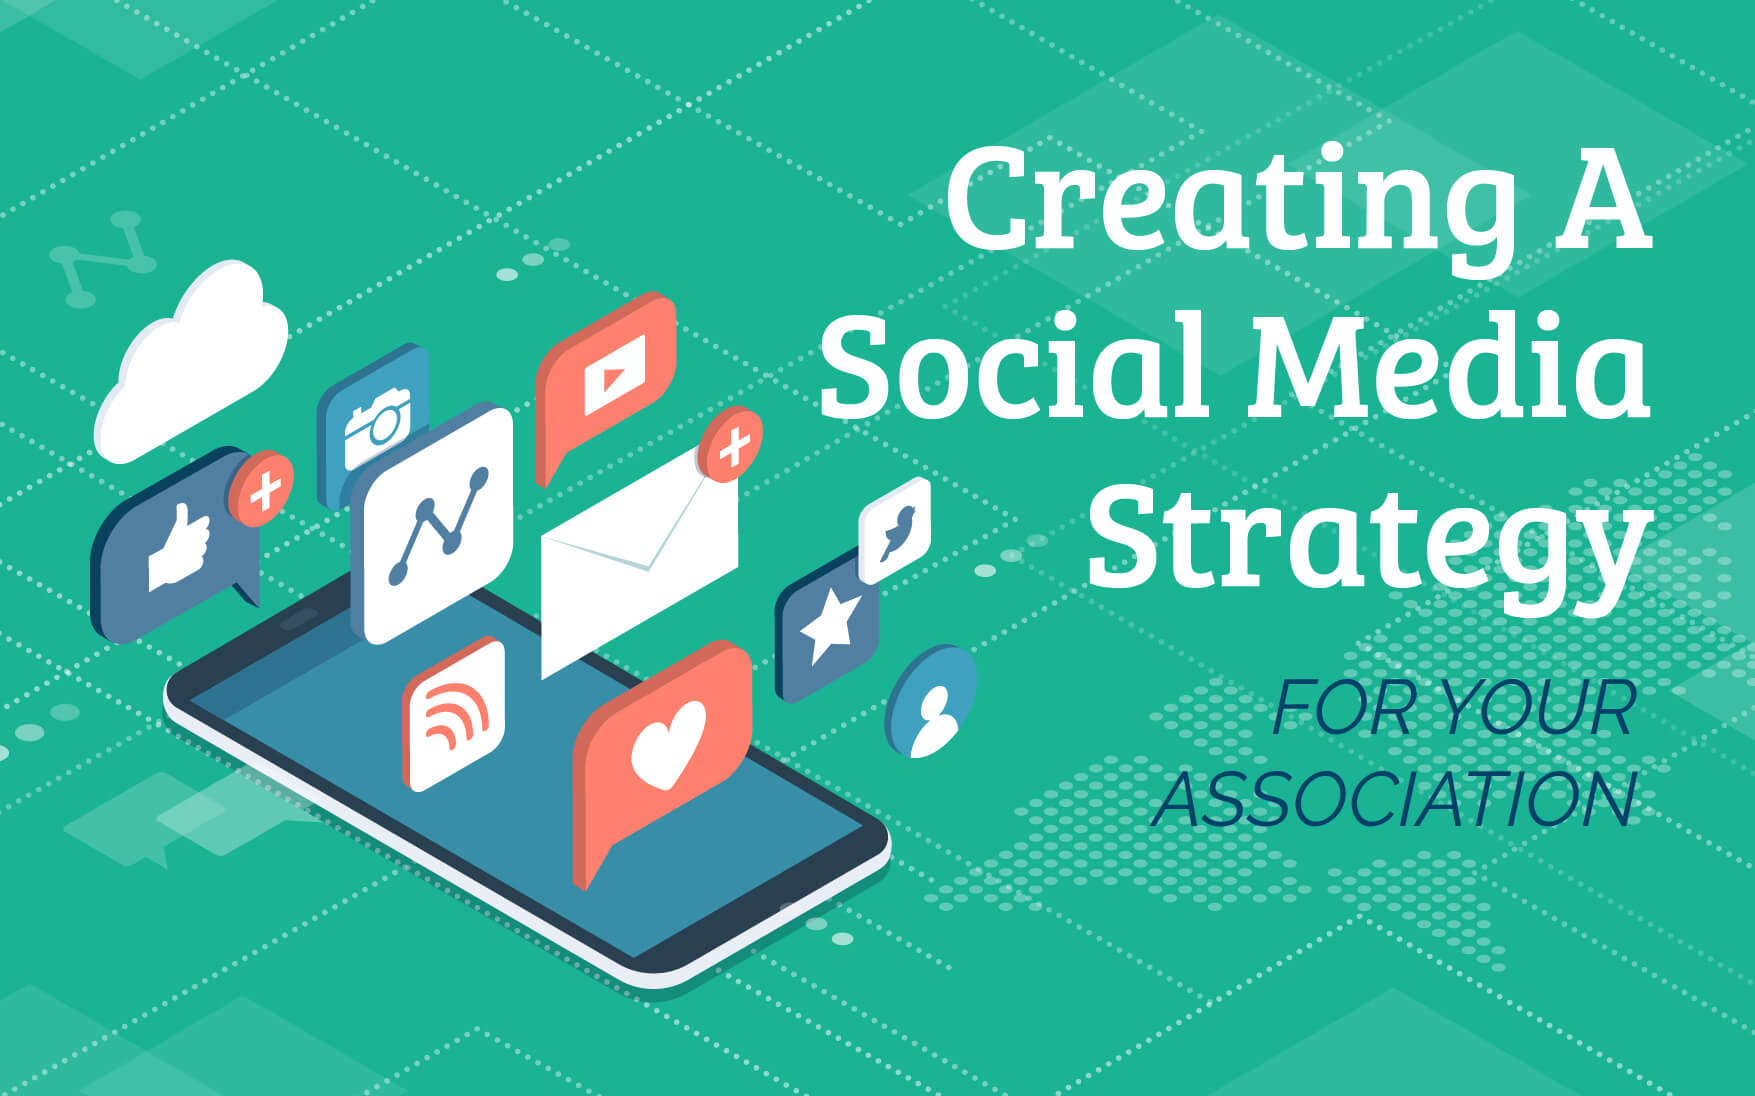 Creating a social media strategy for your association